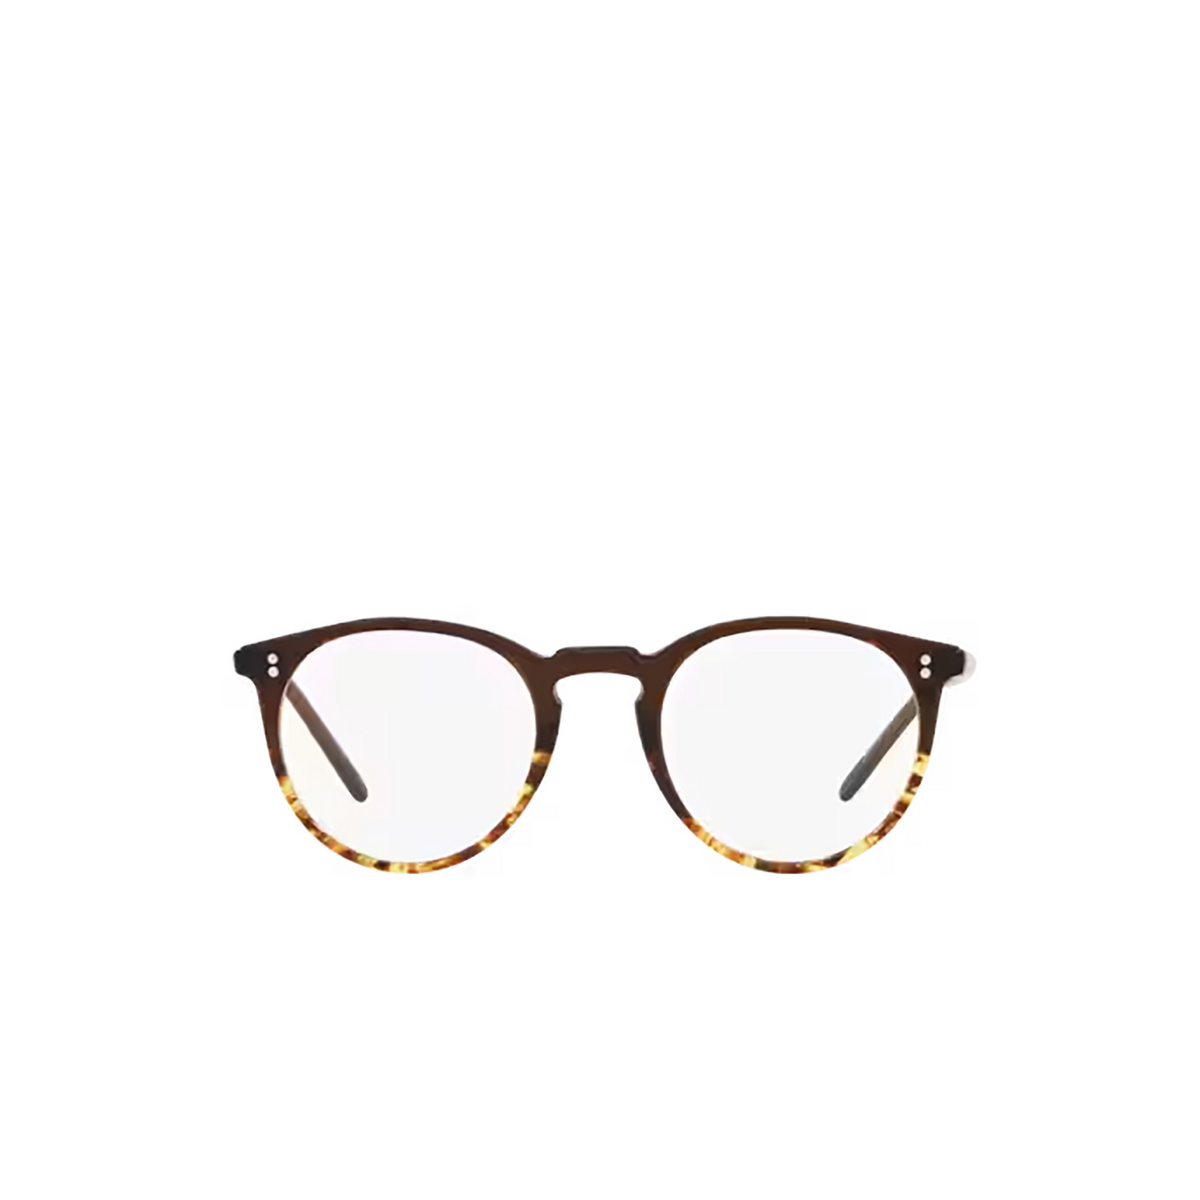 Oliver Peoples O'MALLEY Eyeglasses 1756 Espresso / 382 Gradient - front view